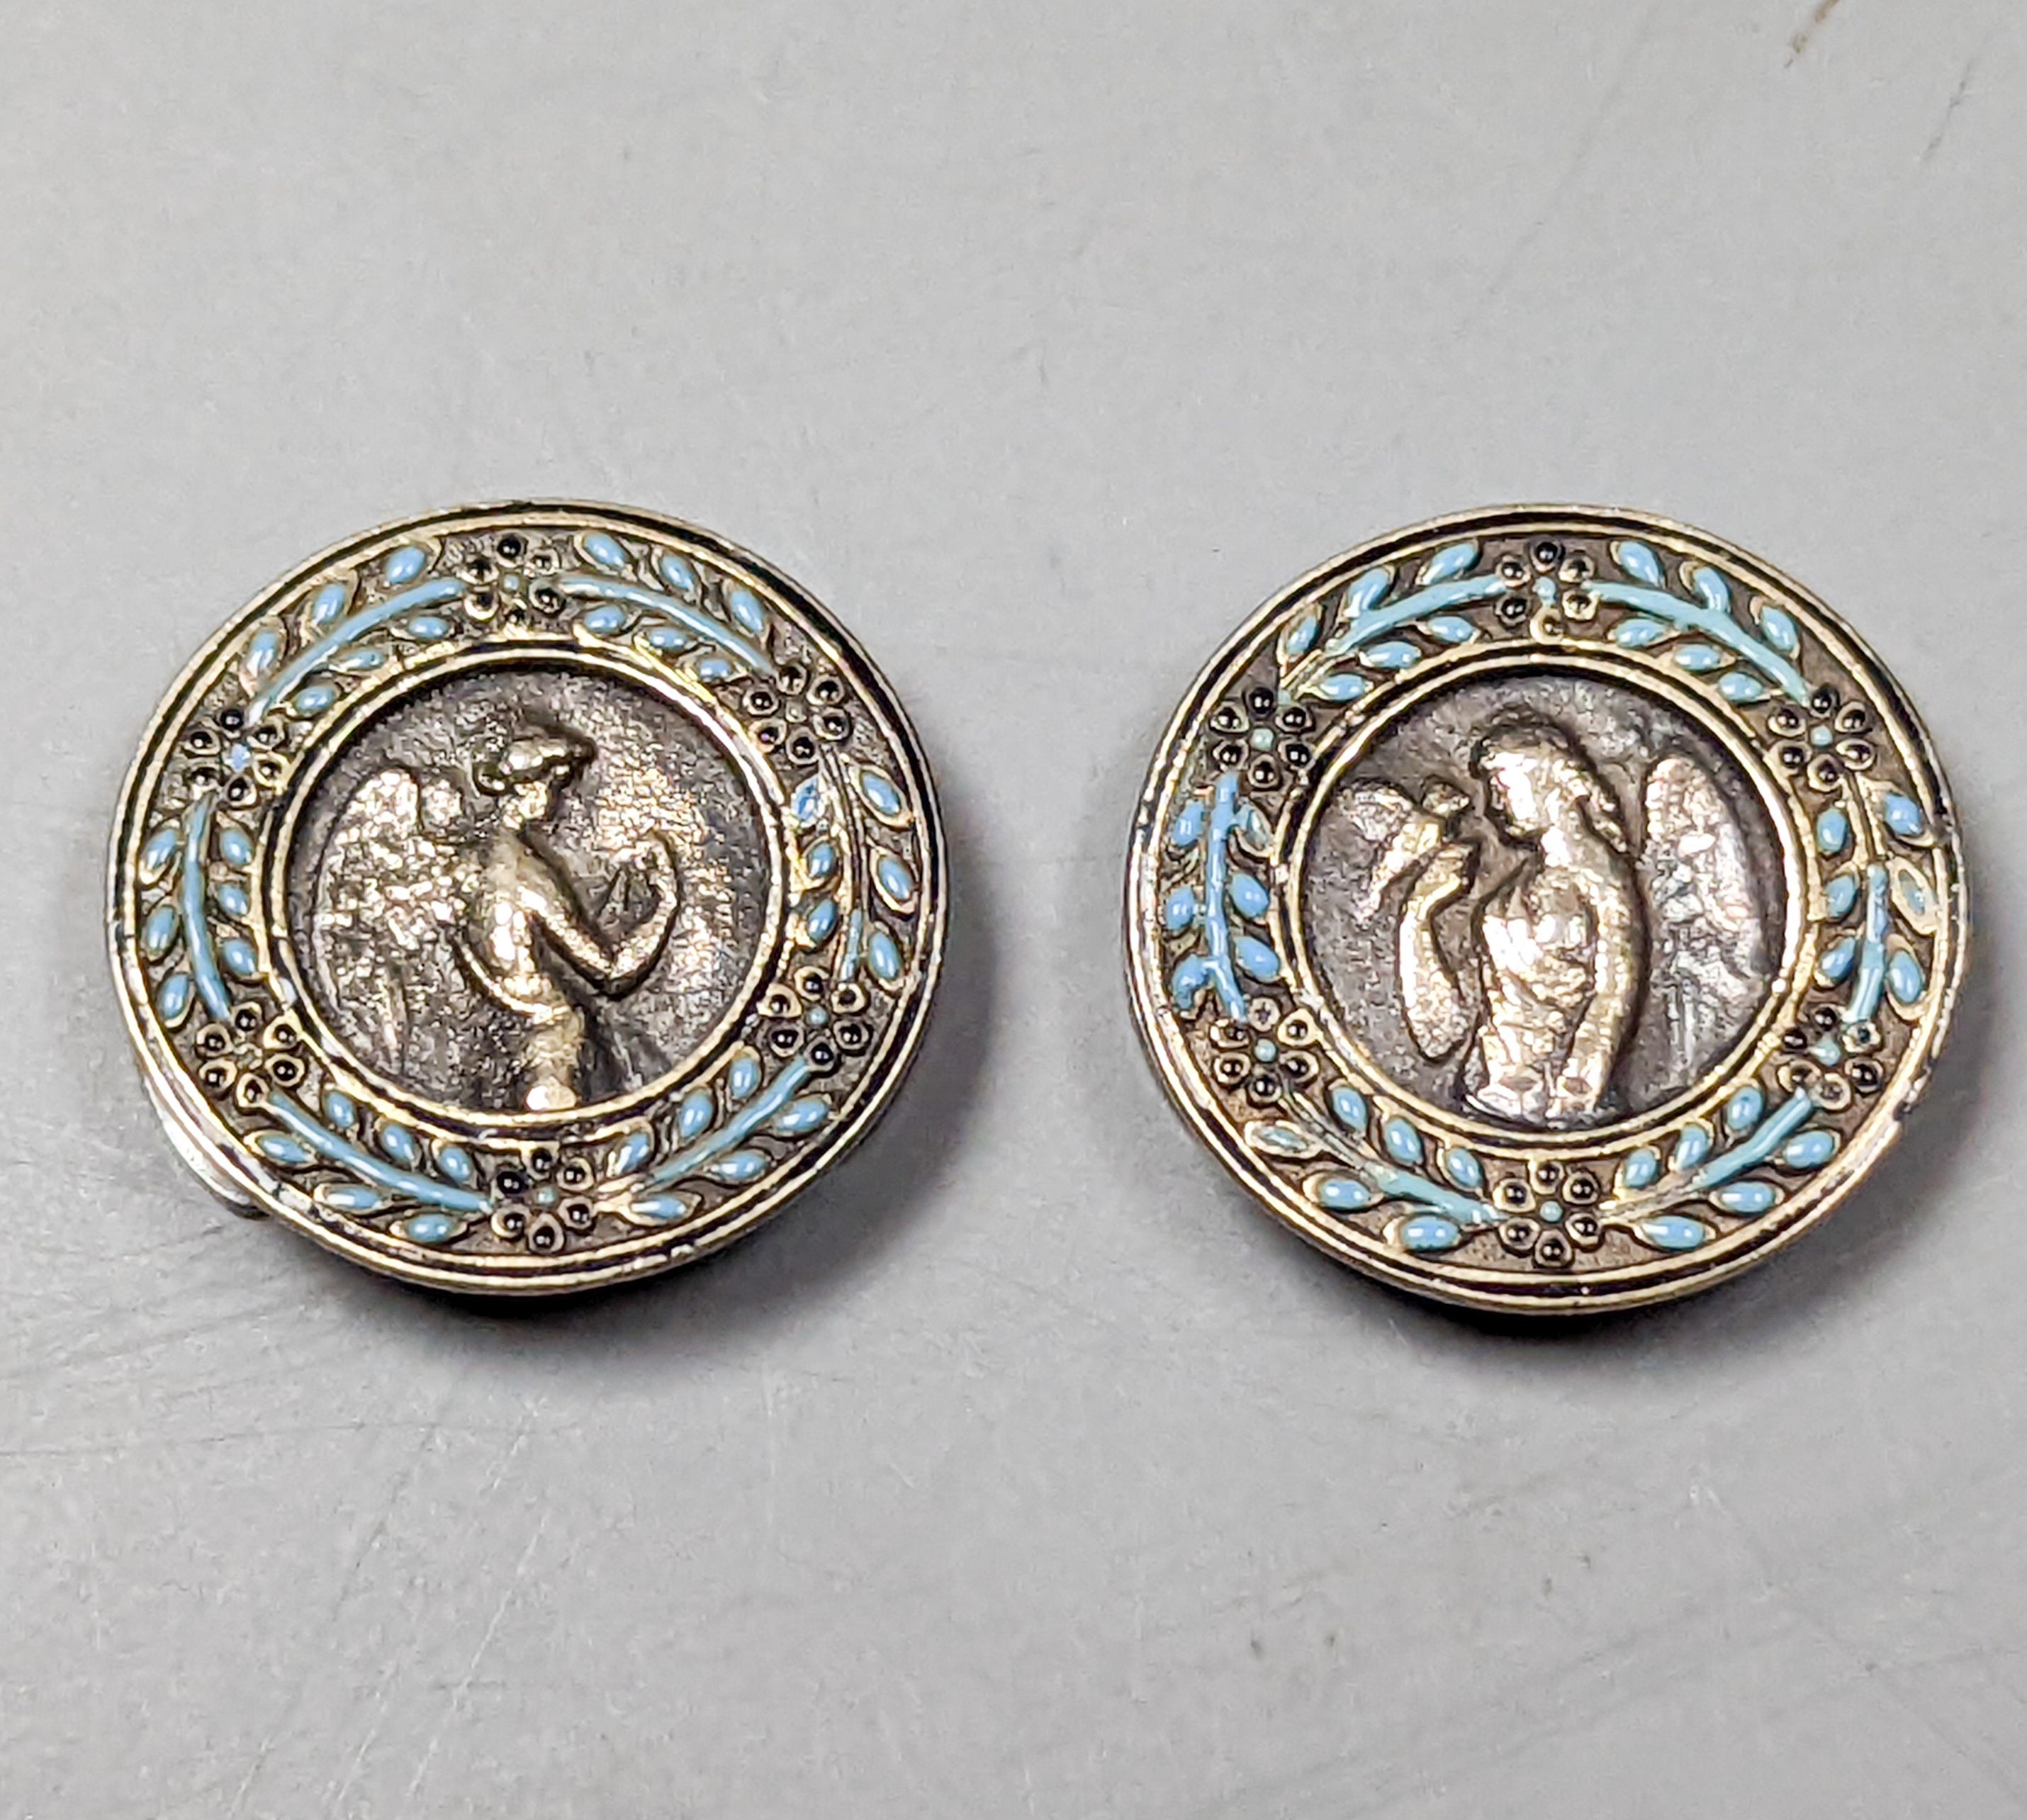 A pair of antique French white metal and enamel buttons, diameter 20mm.